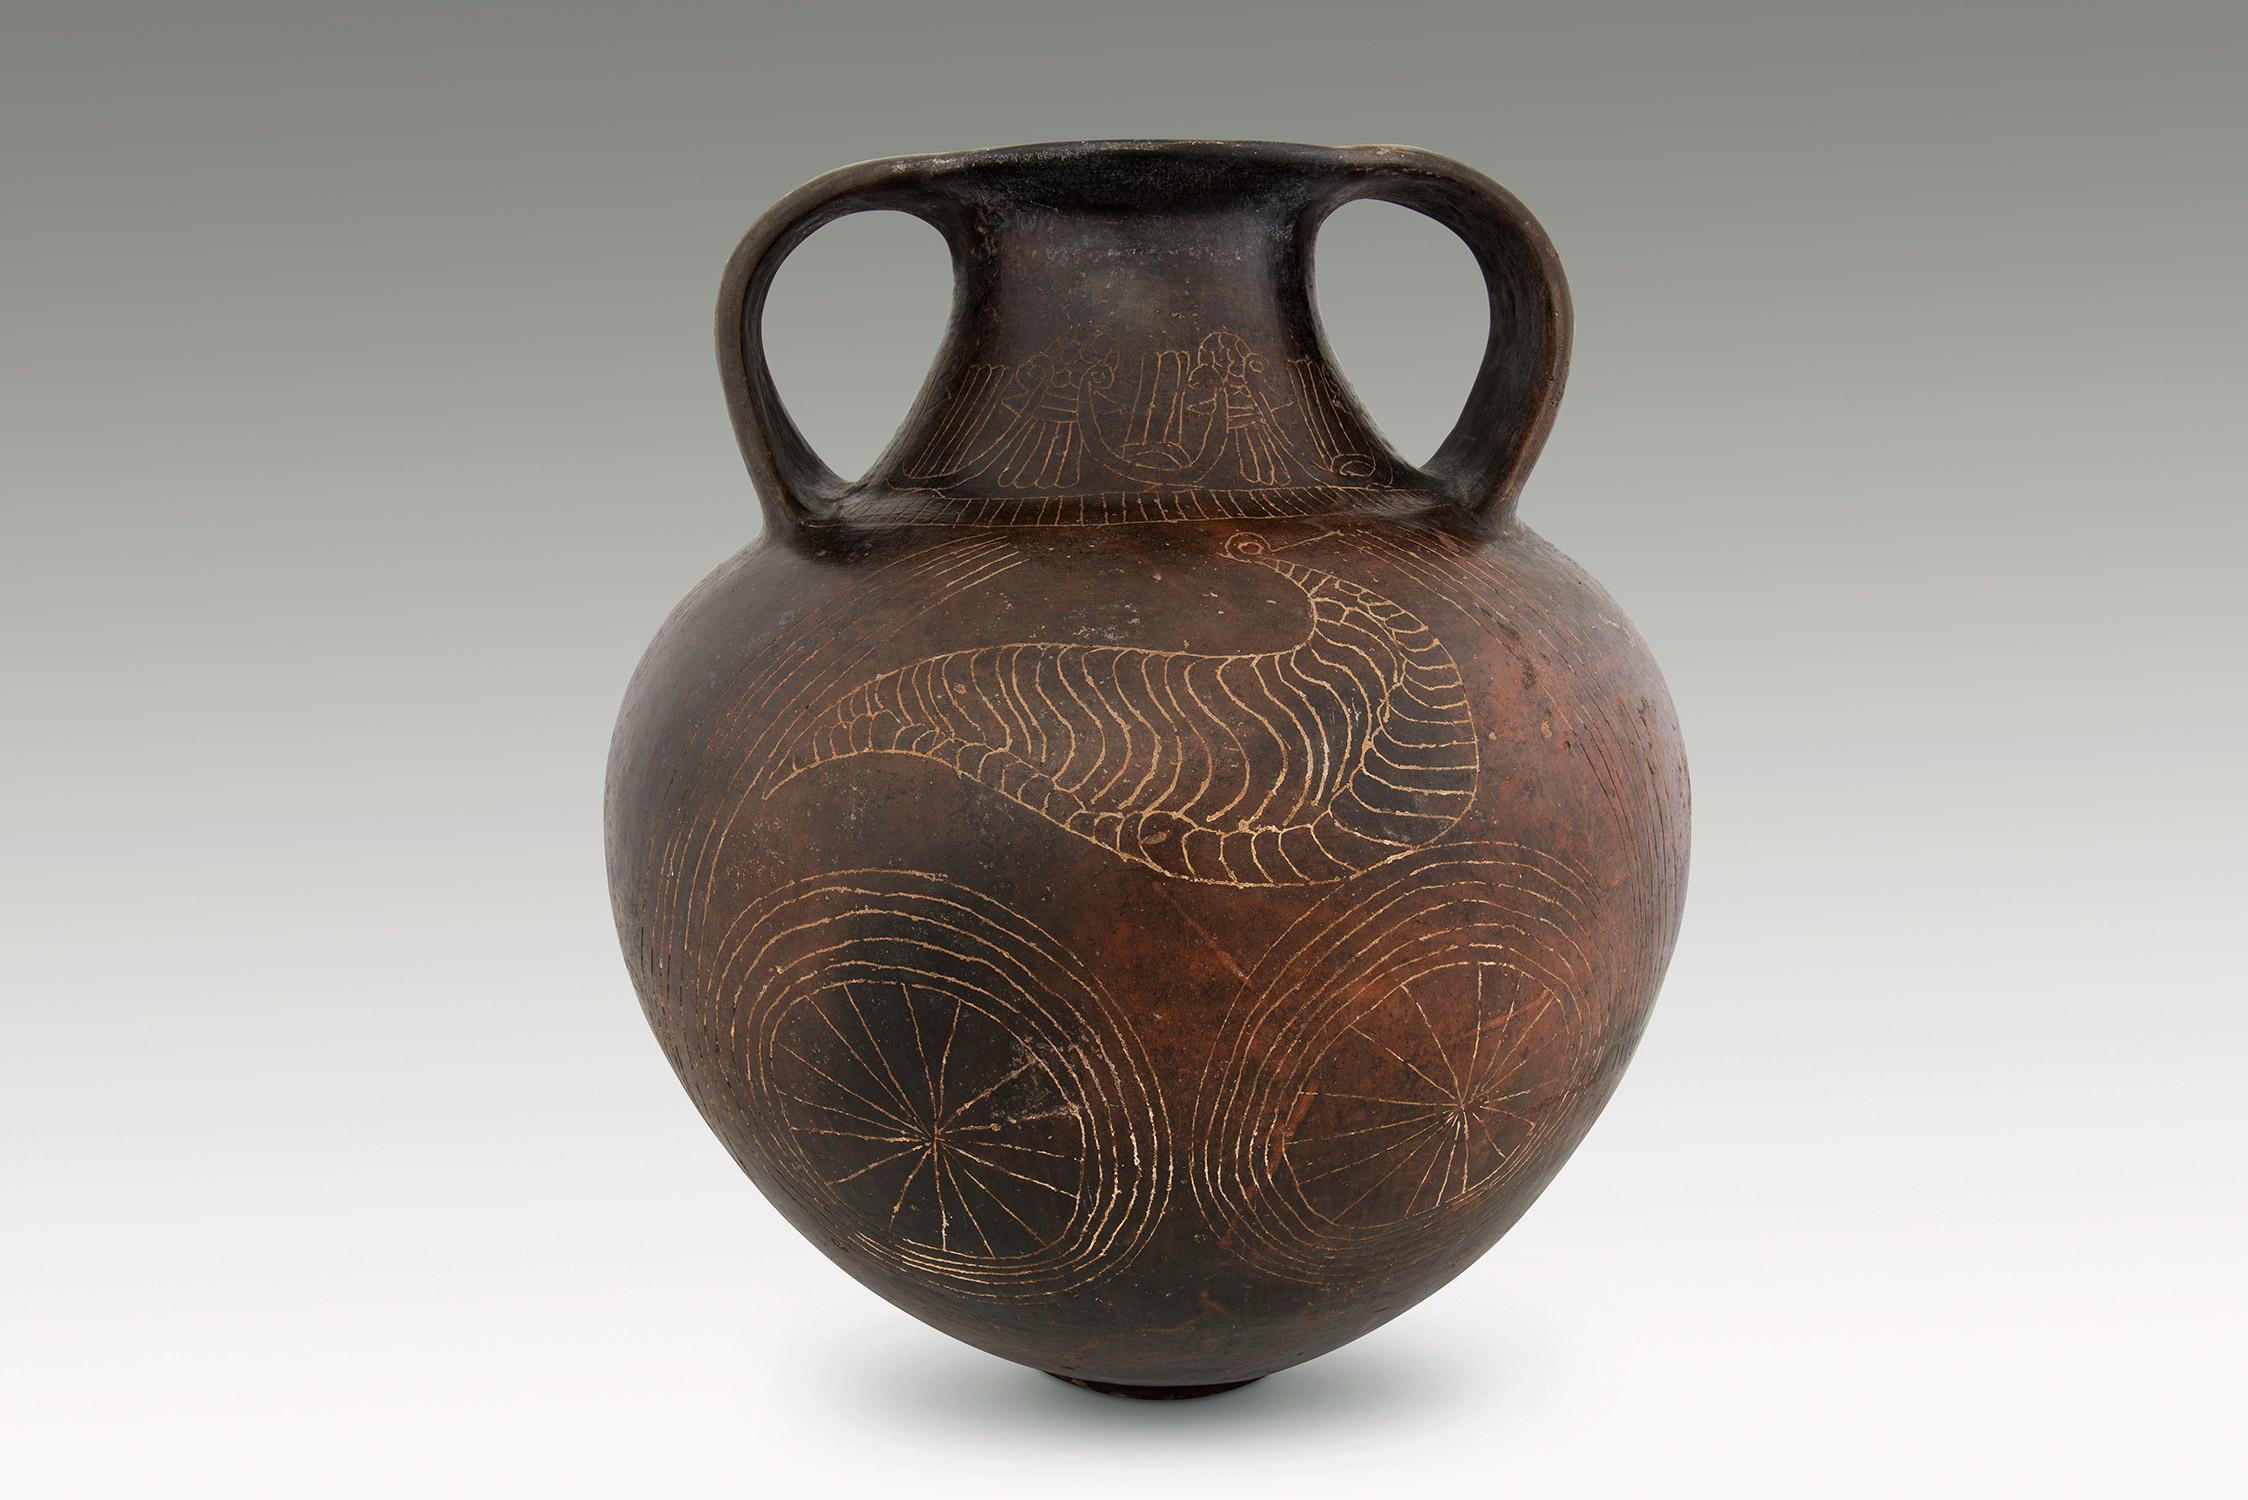 This highly important Etruscan amphora has two flattened handles that are elegantly placed on the shoulders to connect with the vessel’s rim. Both on the front and on the reverse a large stylized bird is placed over a pair of wheel shaped motifs. In